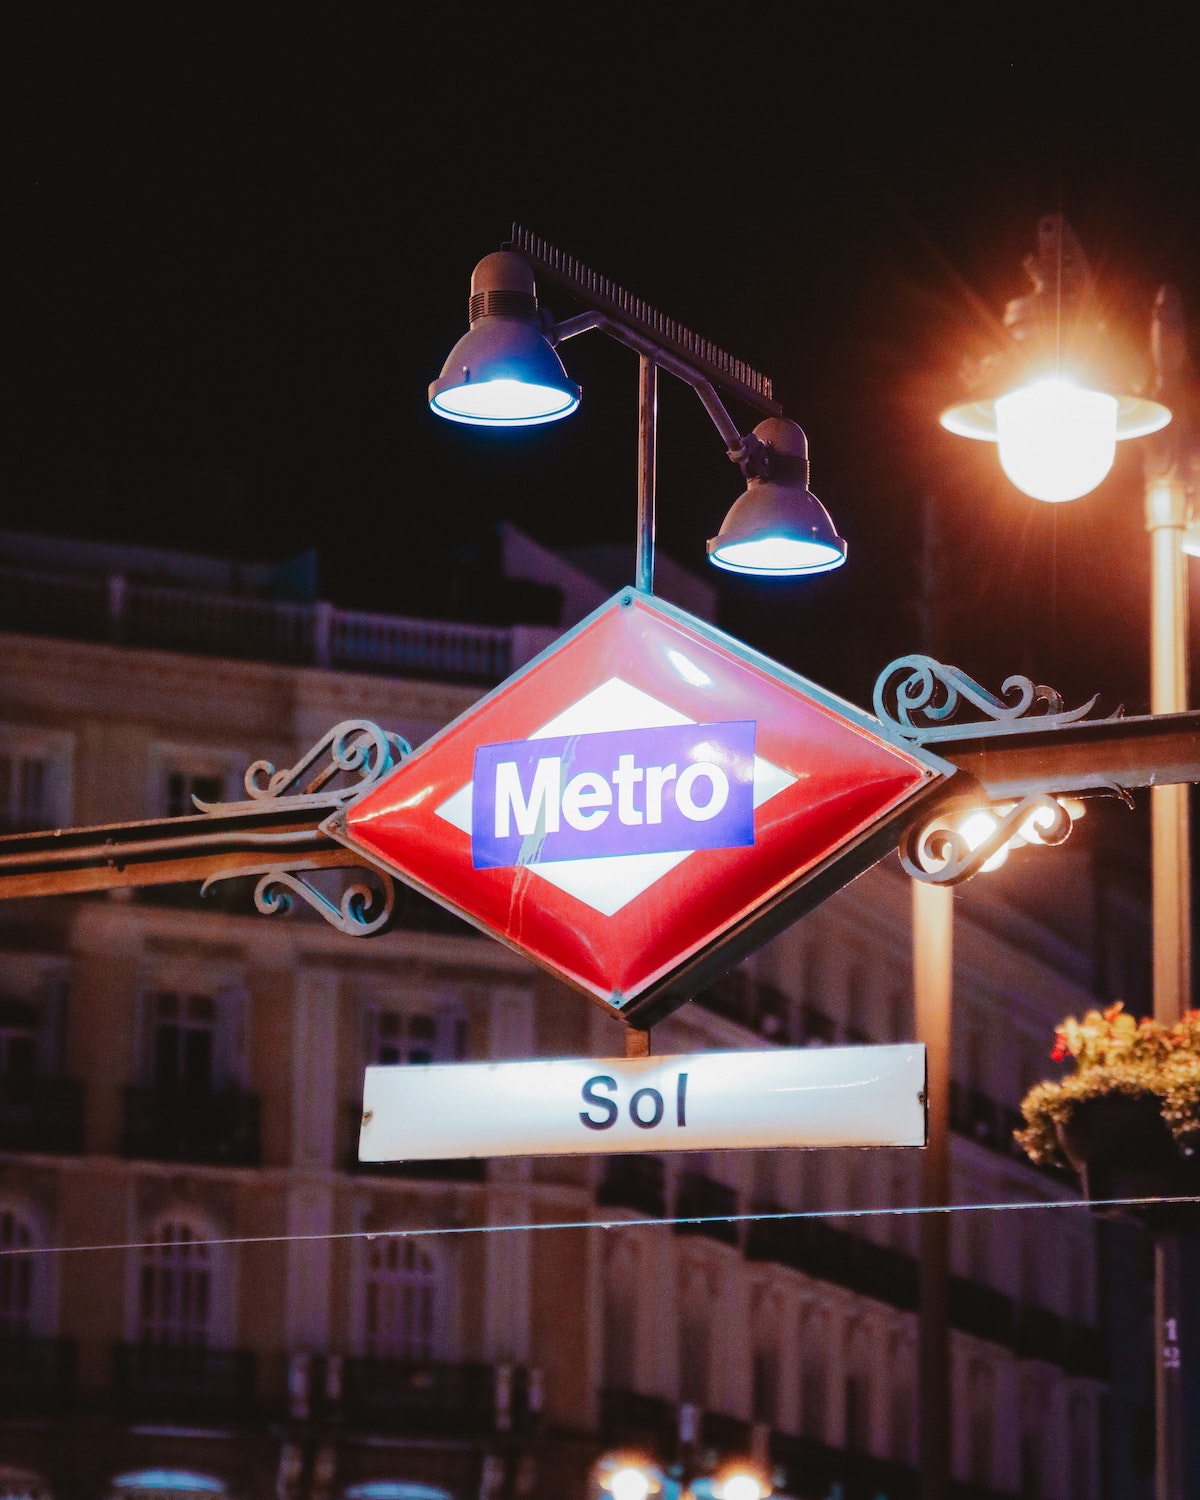 Red, white, and blue diamond-shaped sign marking the entrance to Madrid's Sol metro station at night